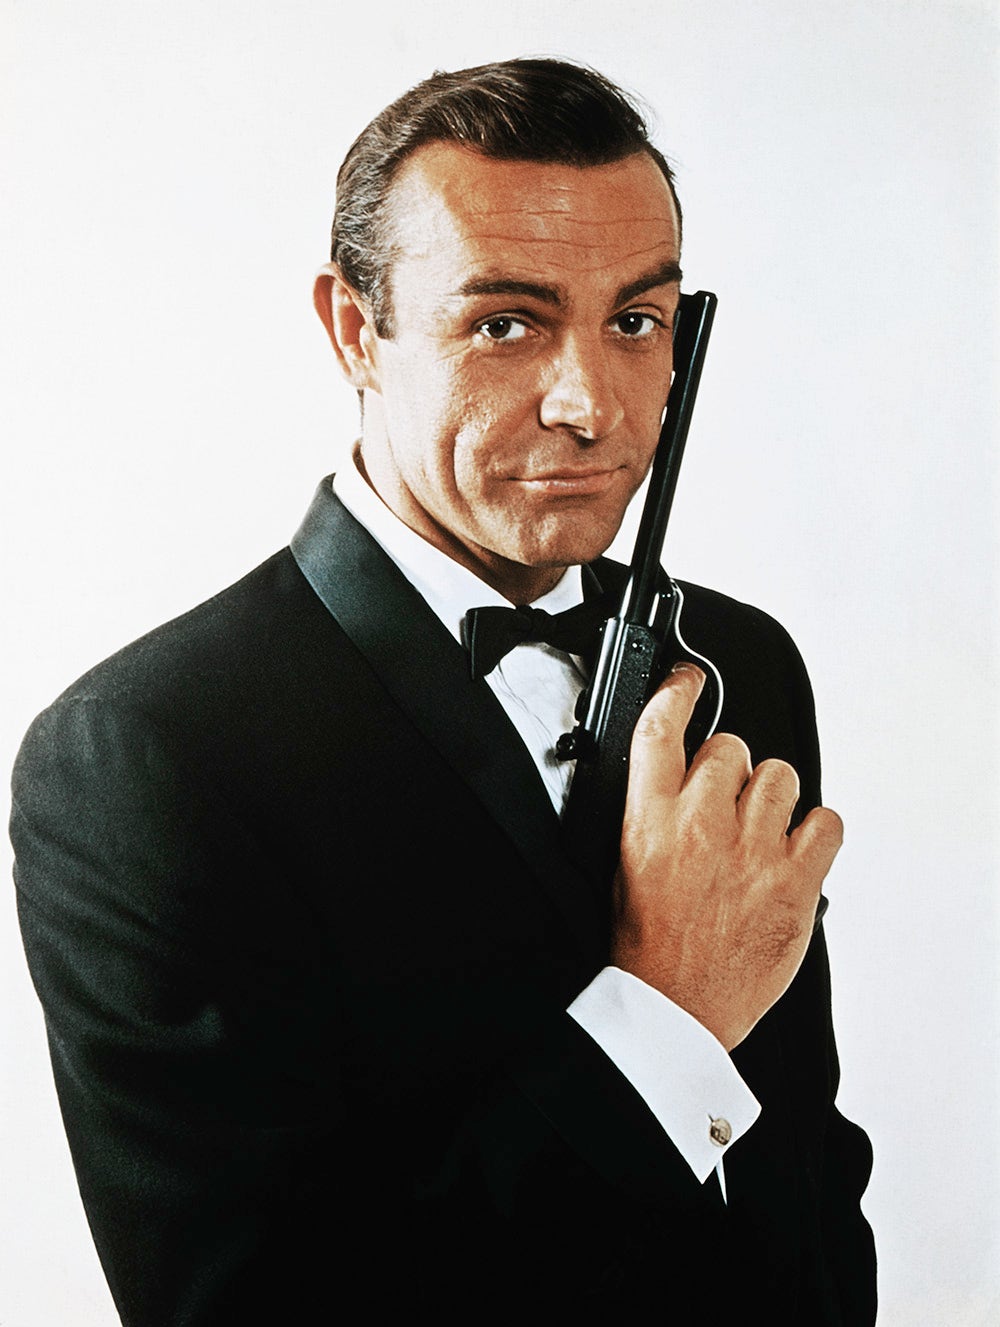 Sean Connery, the Scottish actor famous for his portrayal of James Bond, was battling dementia when he died. (Getty Images)